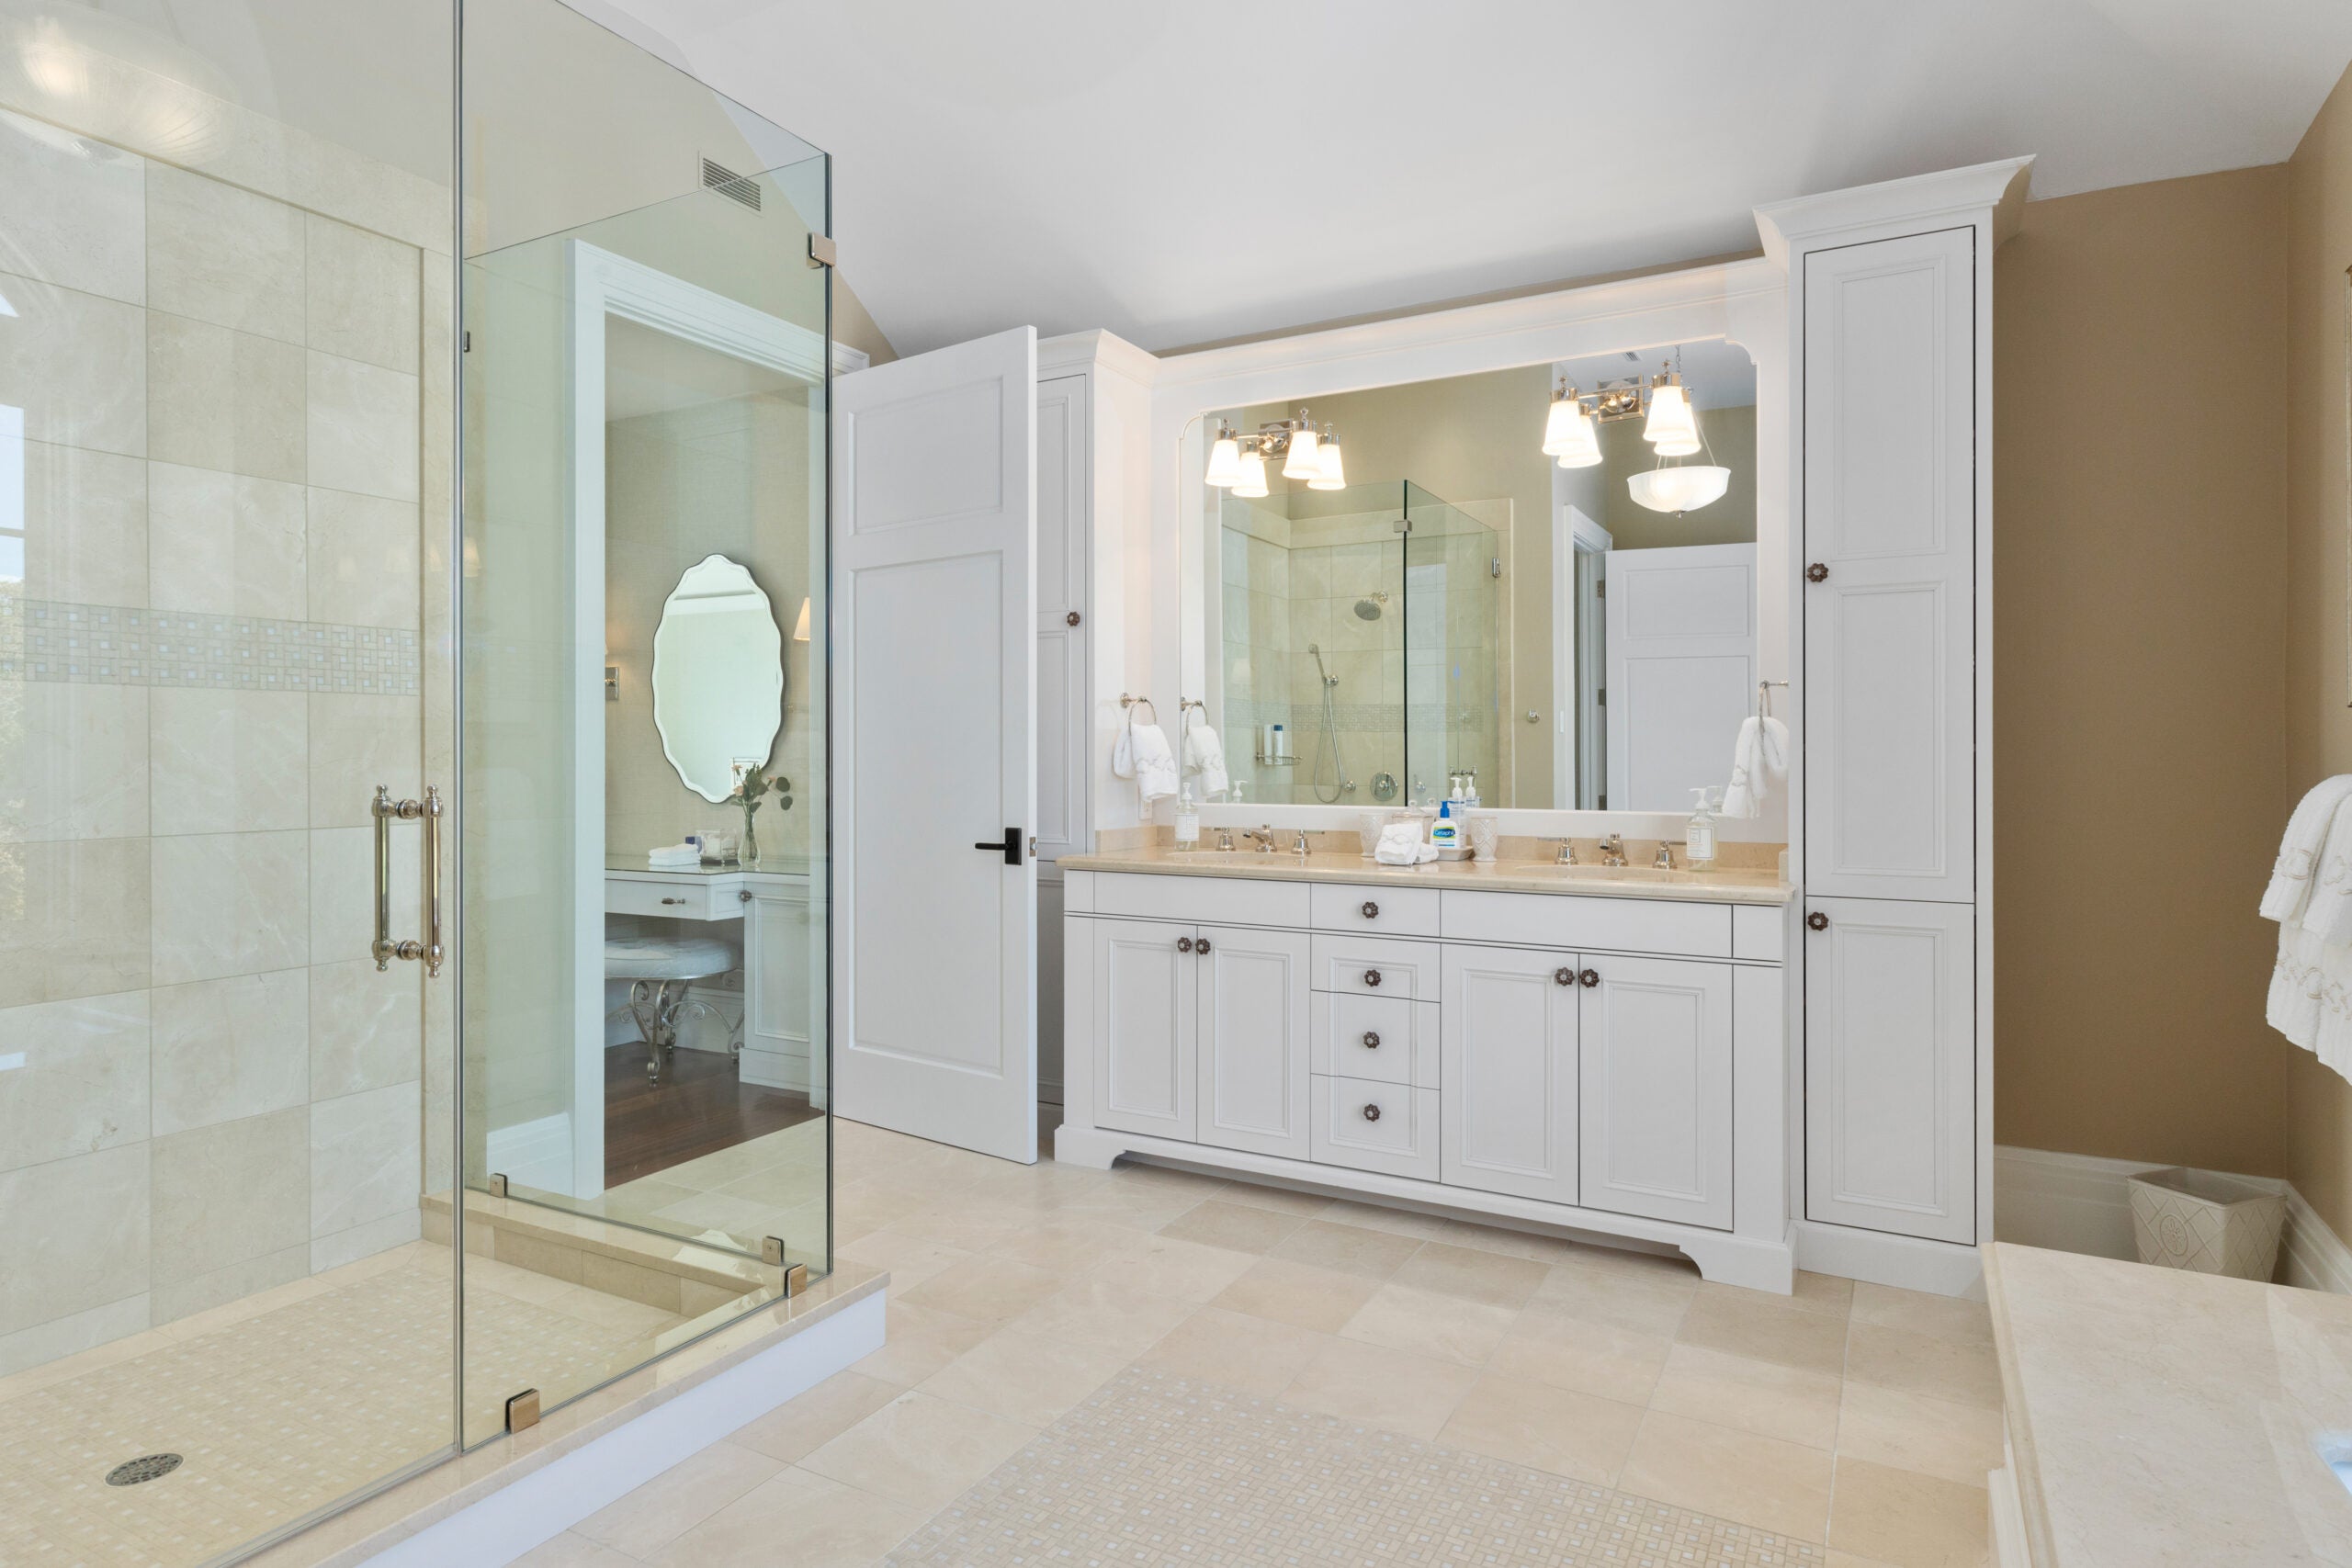 A bath with beige walls, white cabinetry, a dual vanity, and a curbed, frameless-glass shower. The counters are beige, as is the flooring tile.